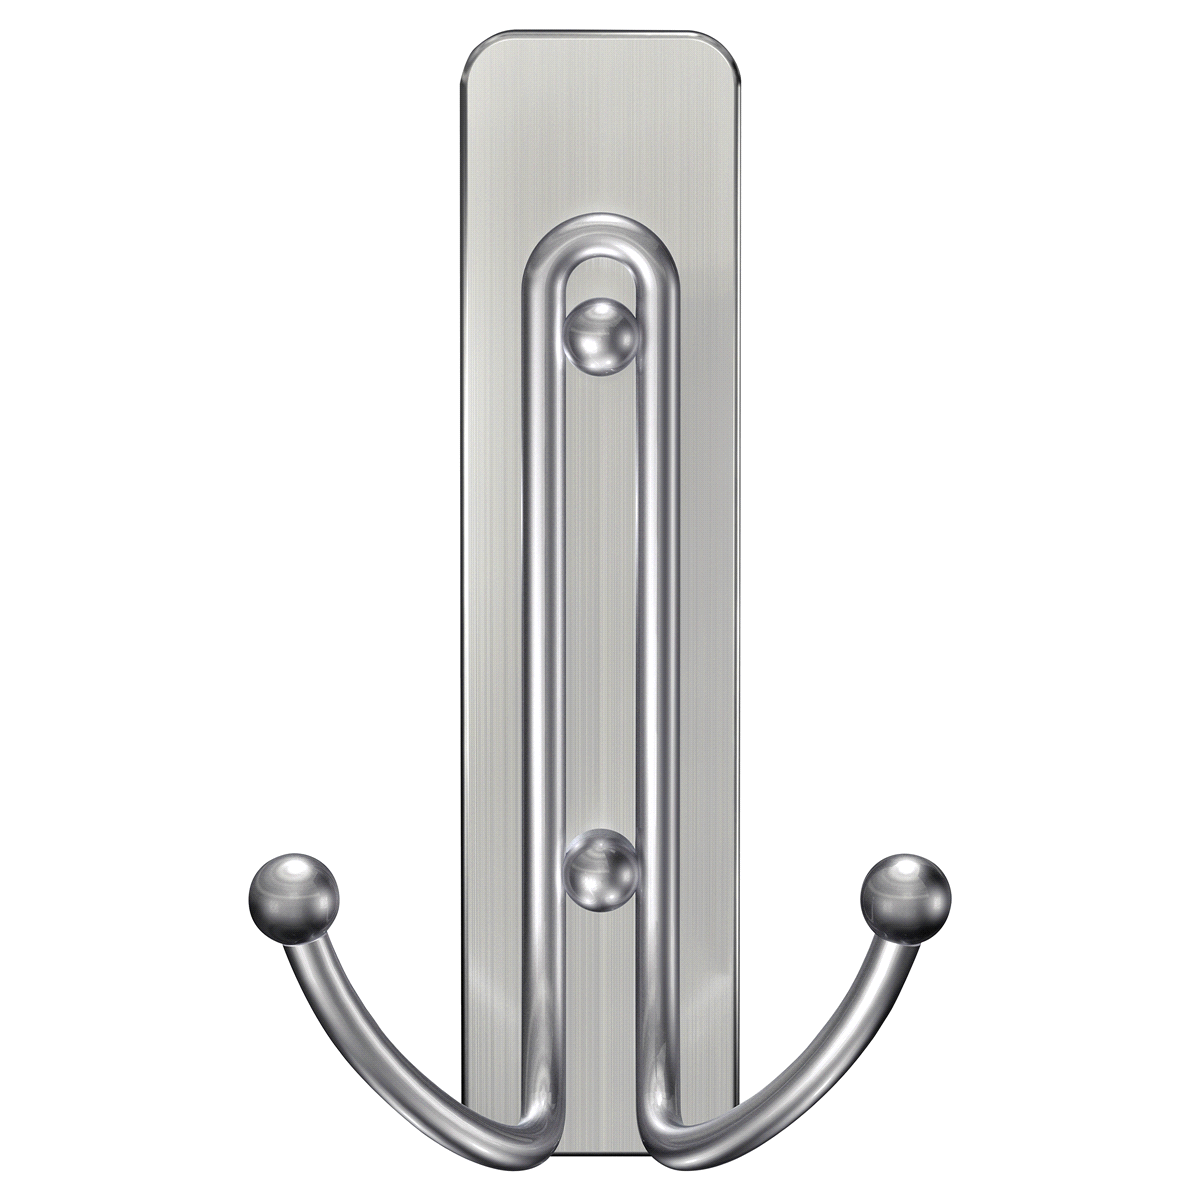 slide 4 of 4, 3M Command Bath Large Double Hook Satin Nickel, 4.03 in x 2.35 in x 1.68 in